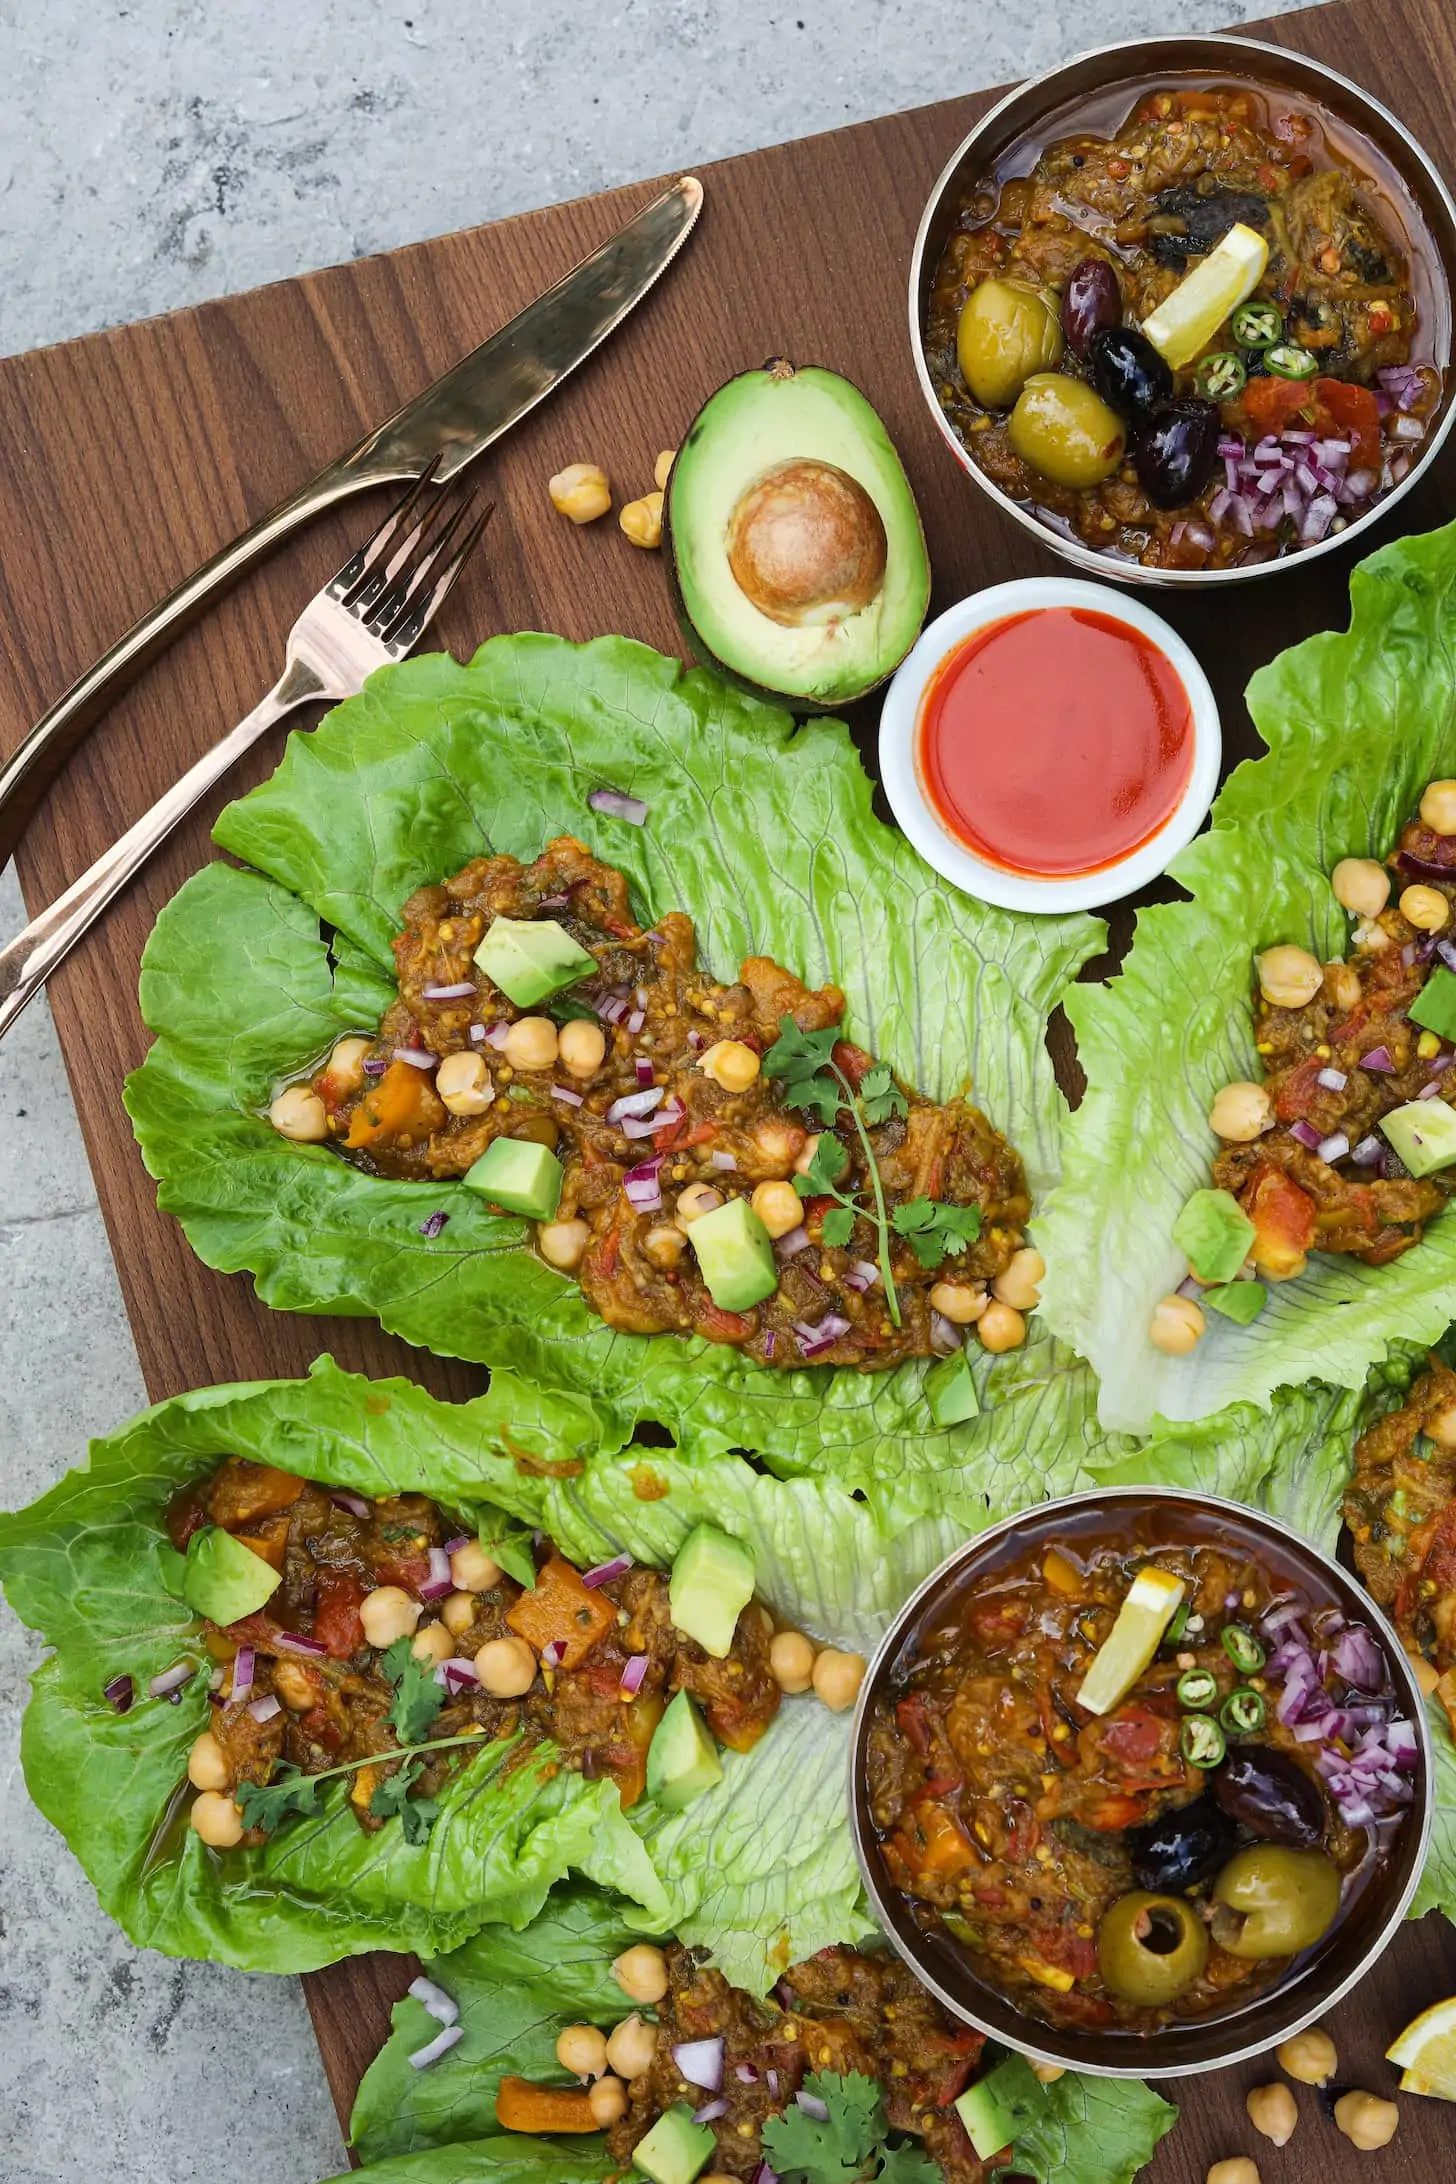 Flat lat of lettuce leaves stuffed with mashed eggplant and topped with avocado pieces and chickpeas with two bowls of mashed eggplant arranged around.